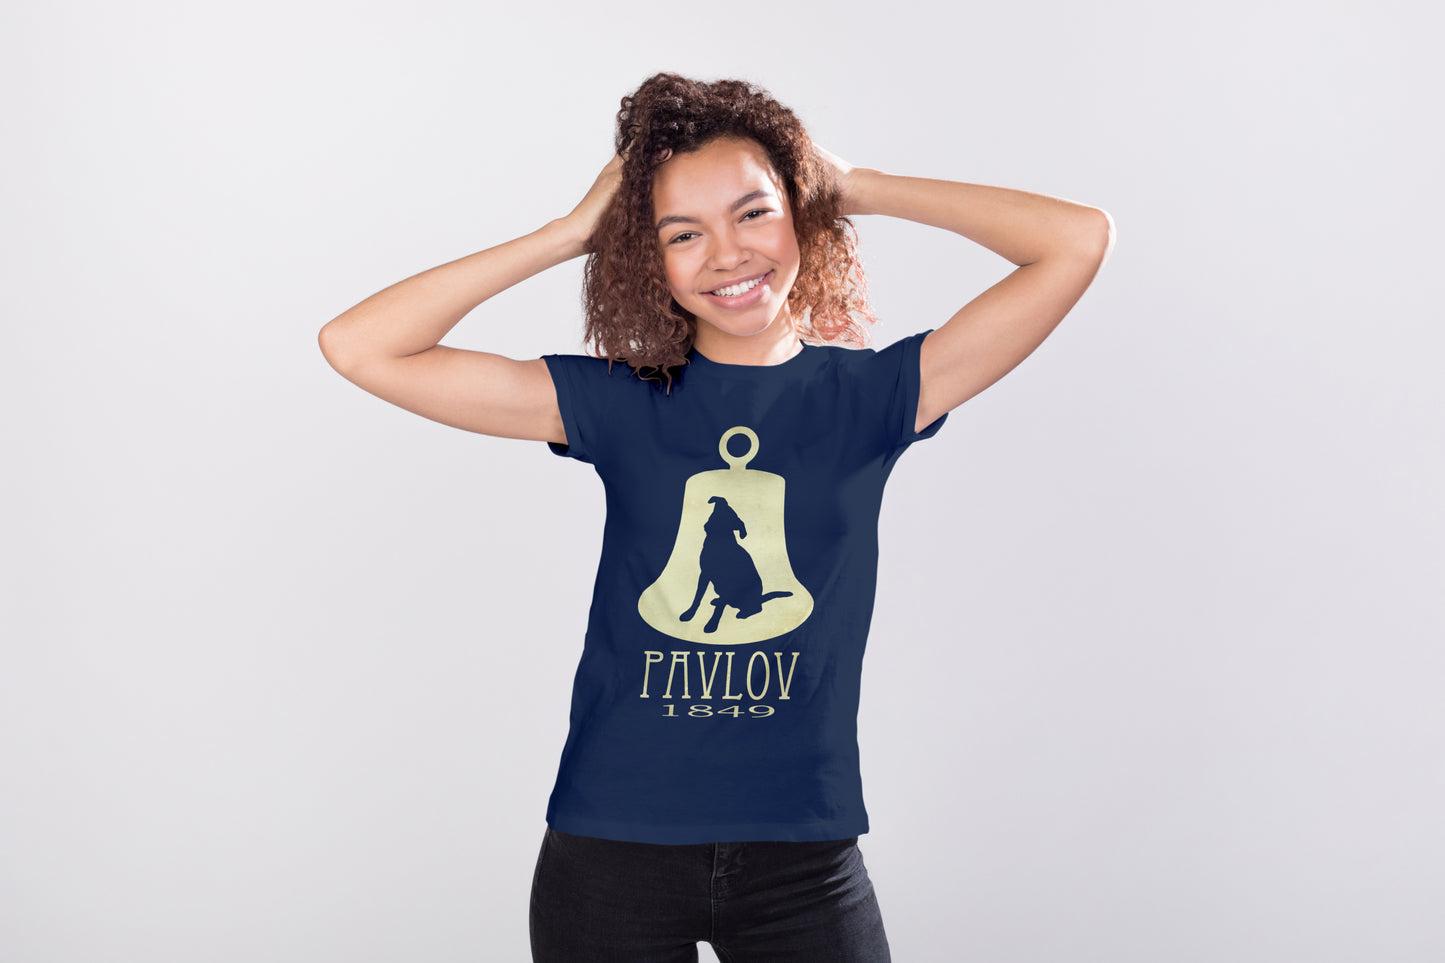 Pavlov Dog Psychologist T-shirt, Classical Conditioning in Psychology Graphic Tee